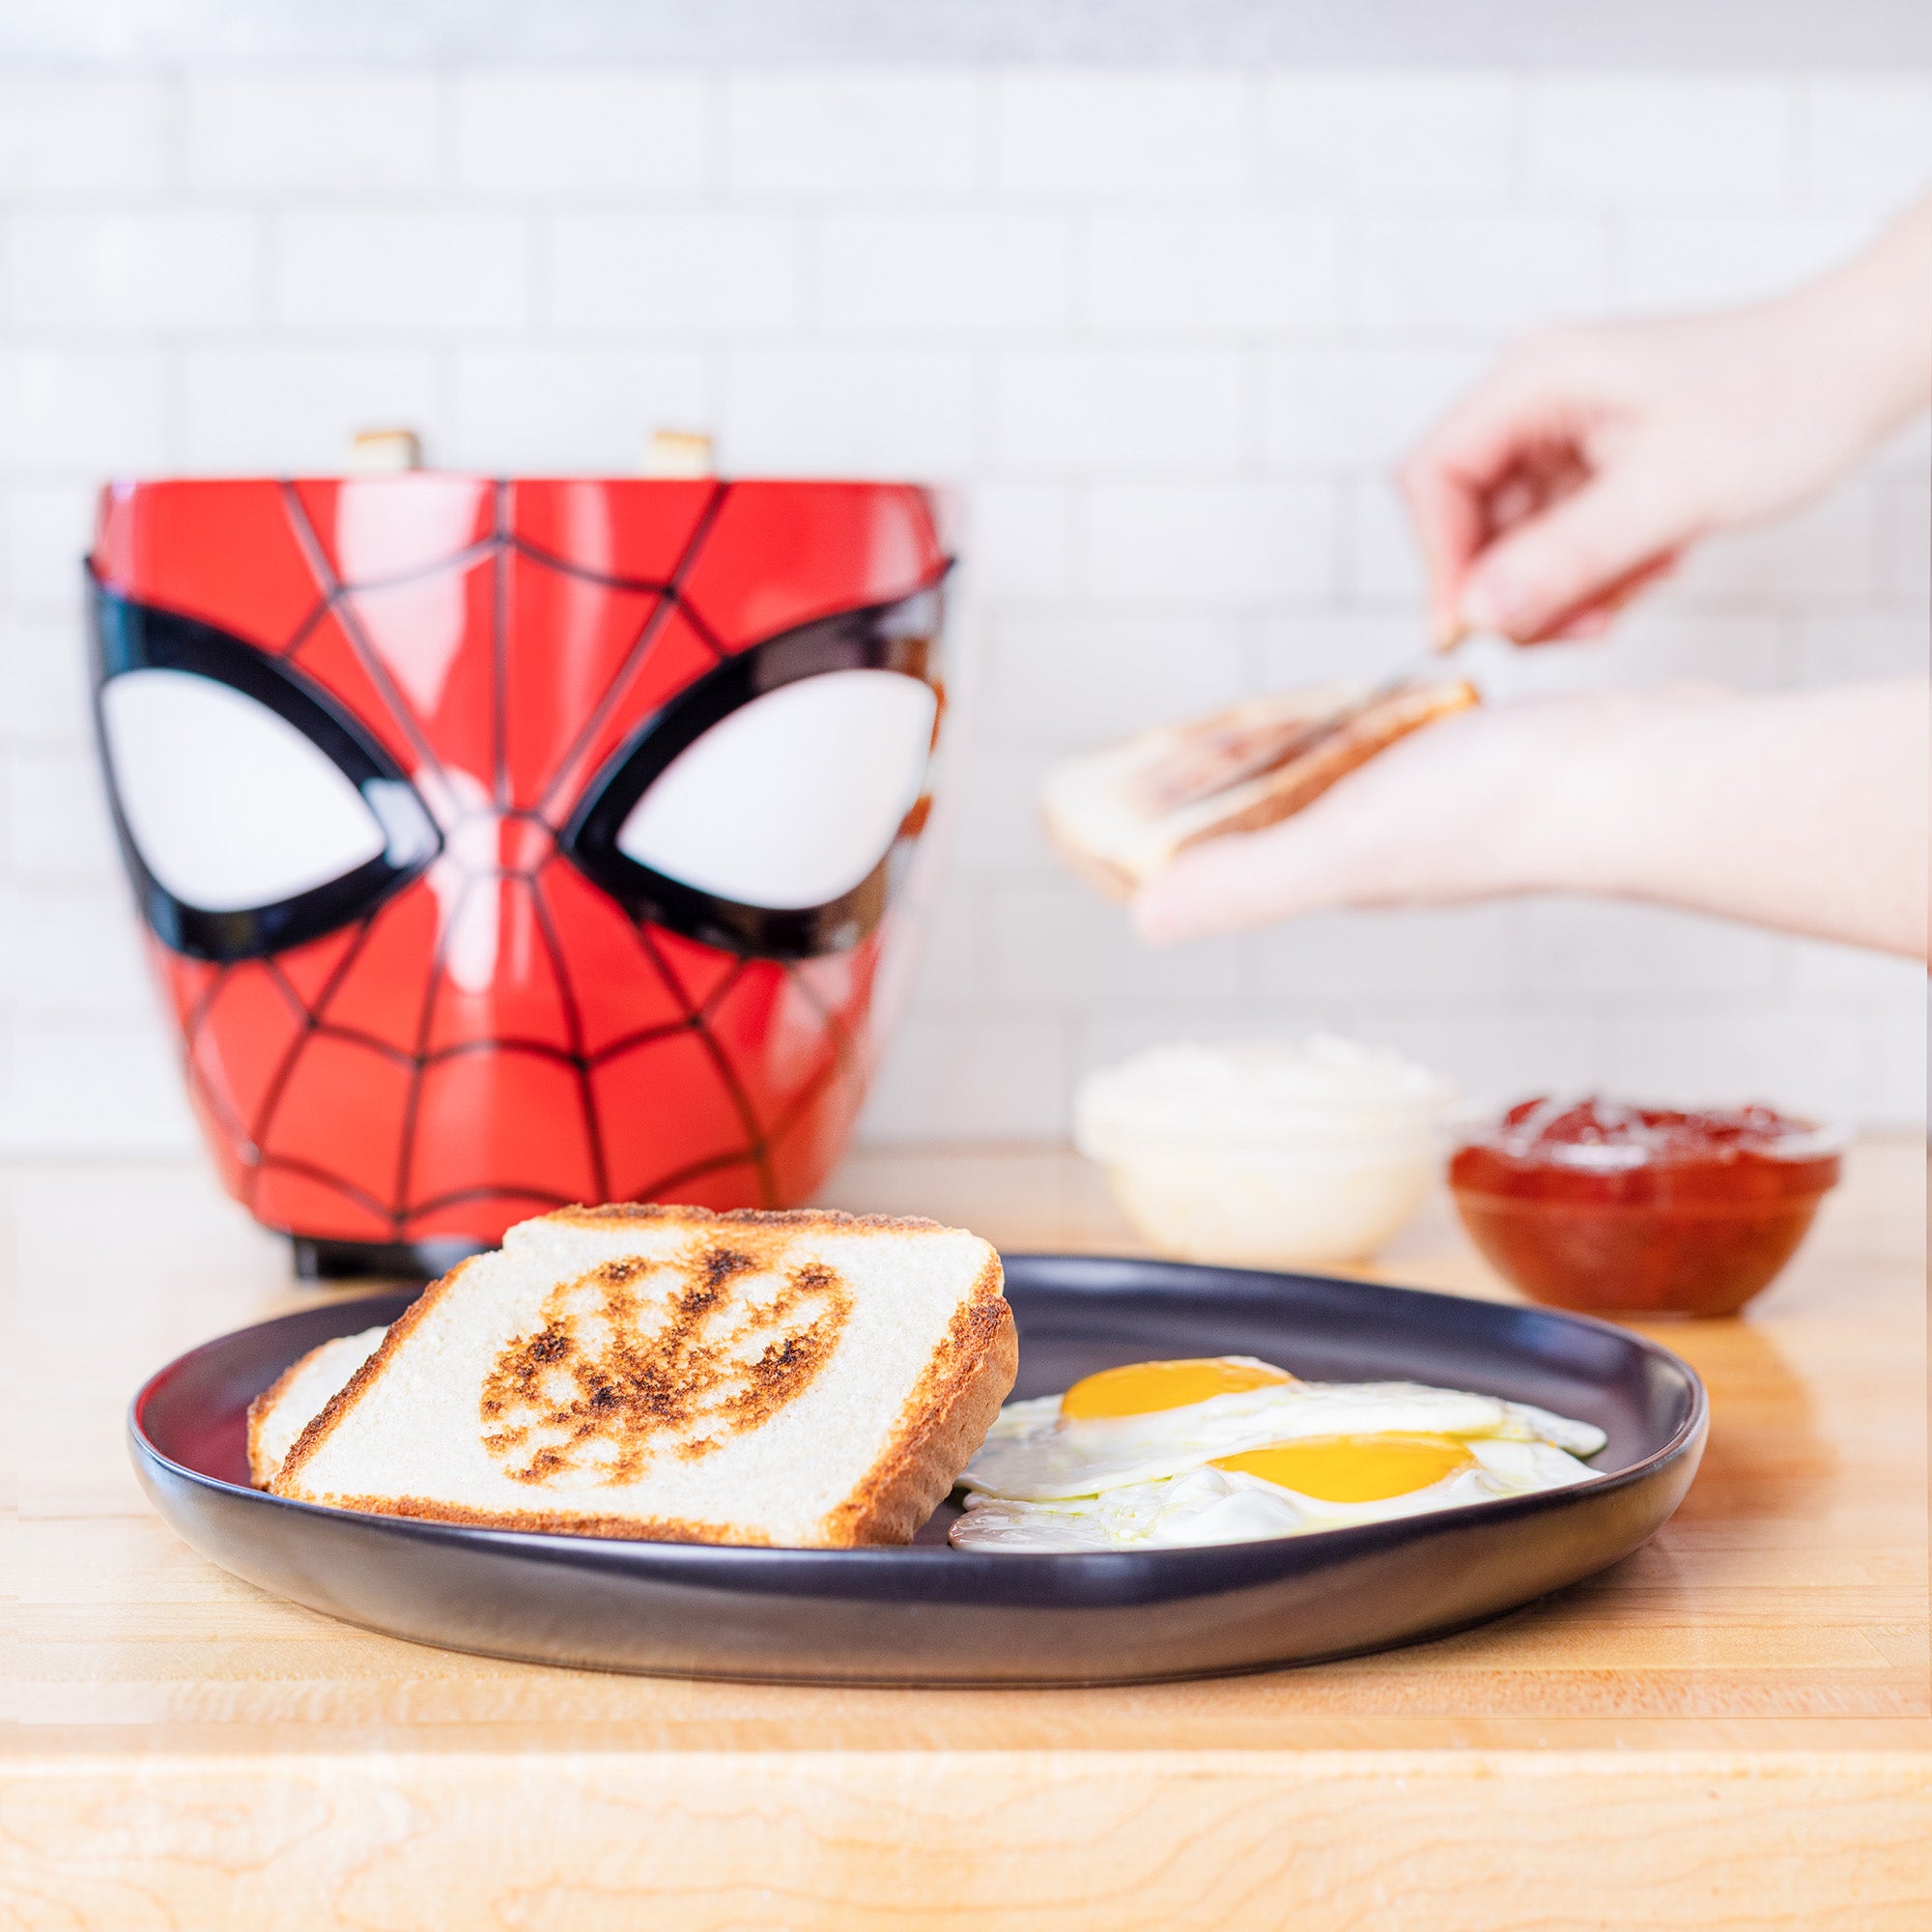 https://cdn.shopify.com/s/files/1/0022/0092/8317/products/UncannySpidermanandR2D2ToastersDelivery-11_2000x.jpg?v=1638830066